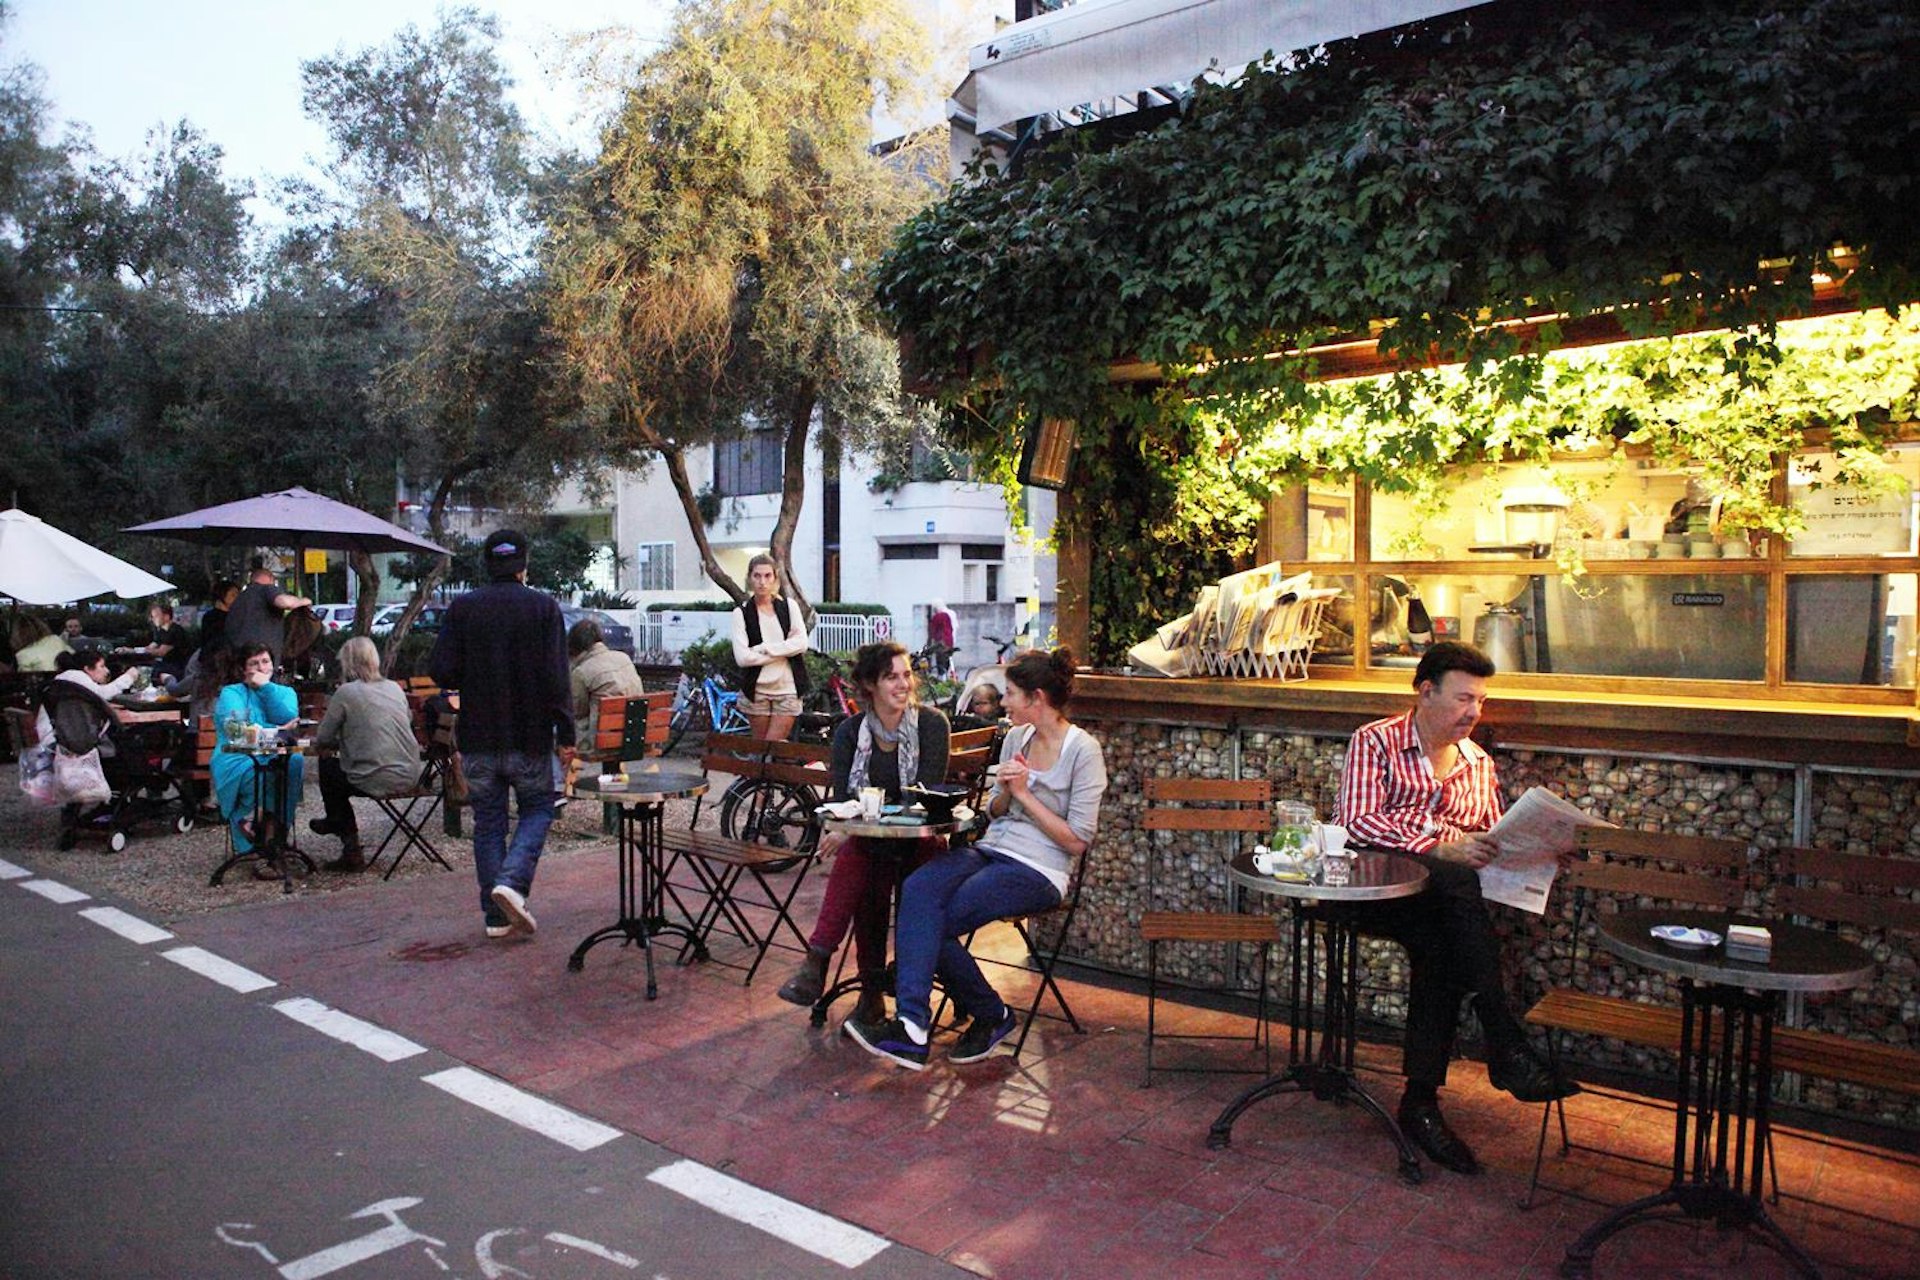 A popular day-to-night hangout on Ben Gurion Blvd. Image by Dan Porges / Getty Images